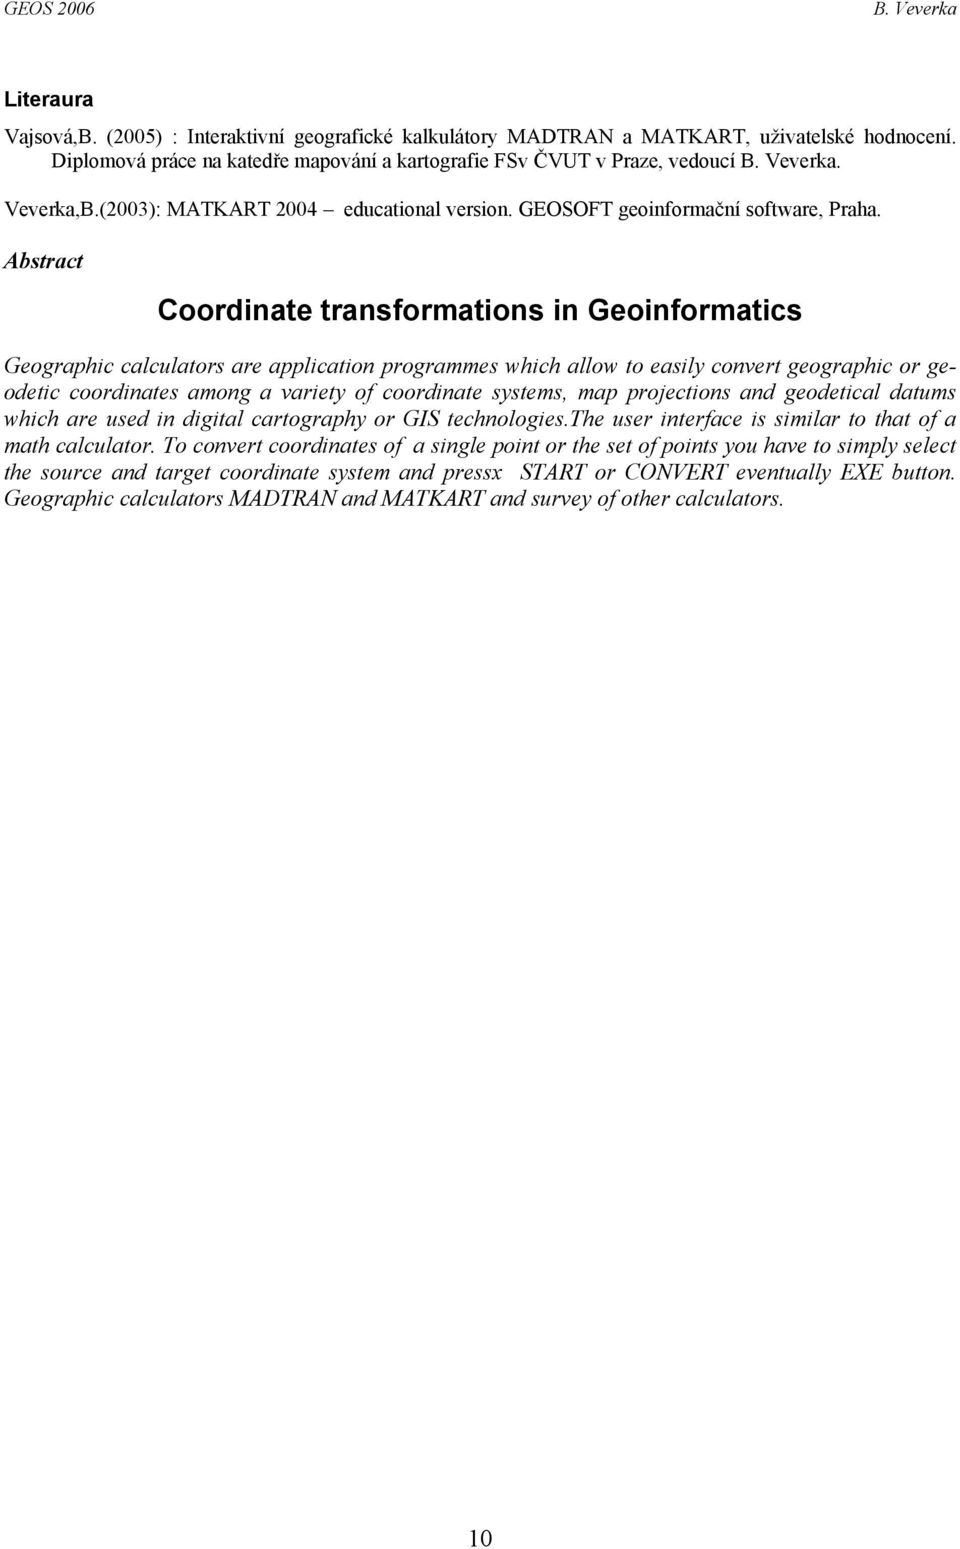 Abstract Coordinate transformations in Geoinformatics Geographic calculators are application programmes which allow to easily convert geographic or geodetic coordinates among a variety of coordinate